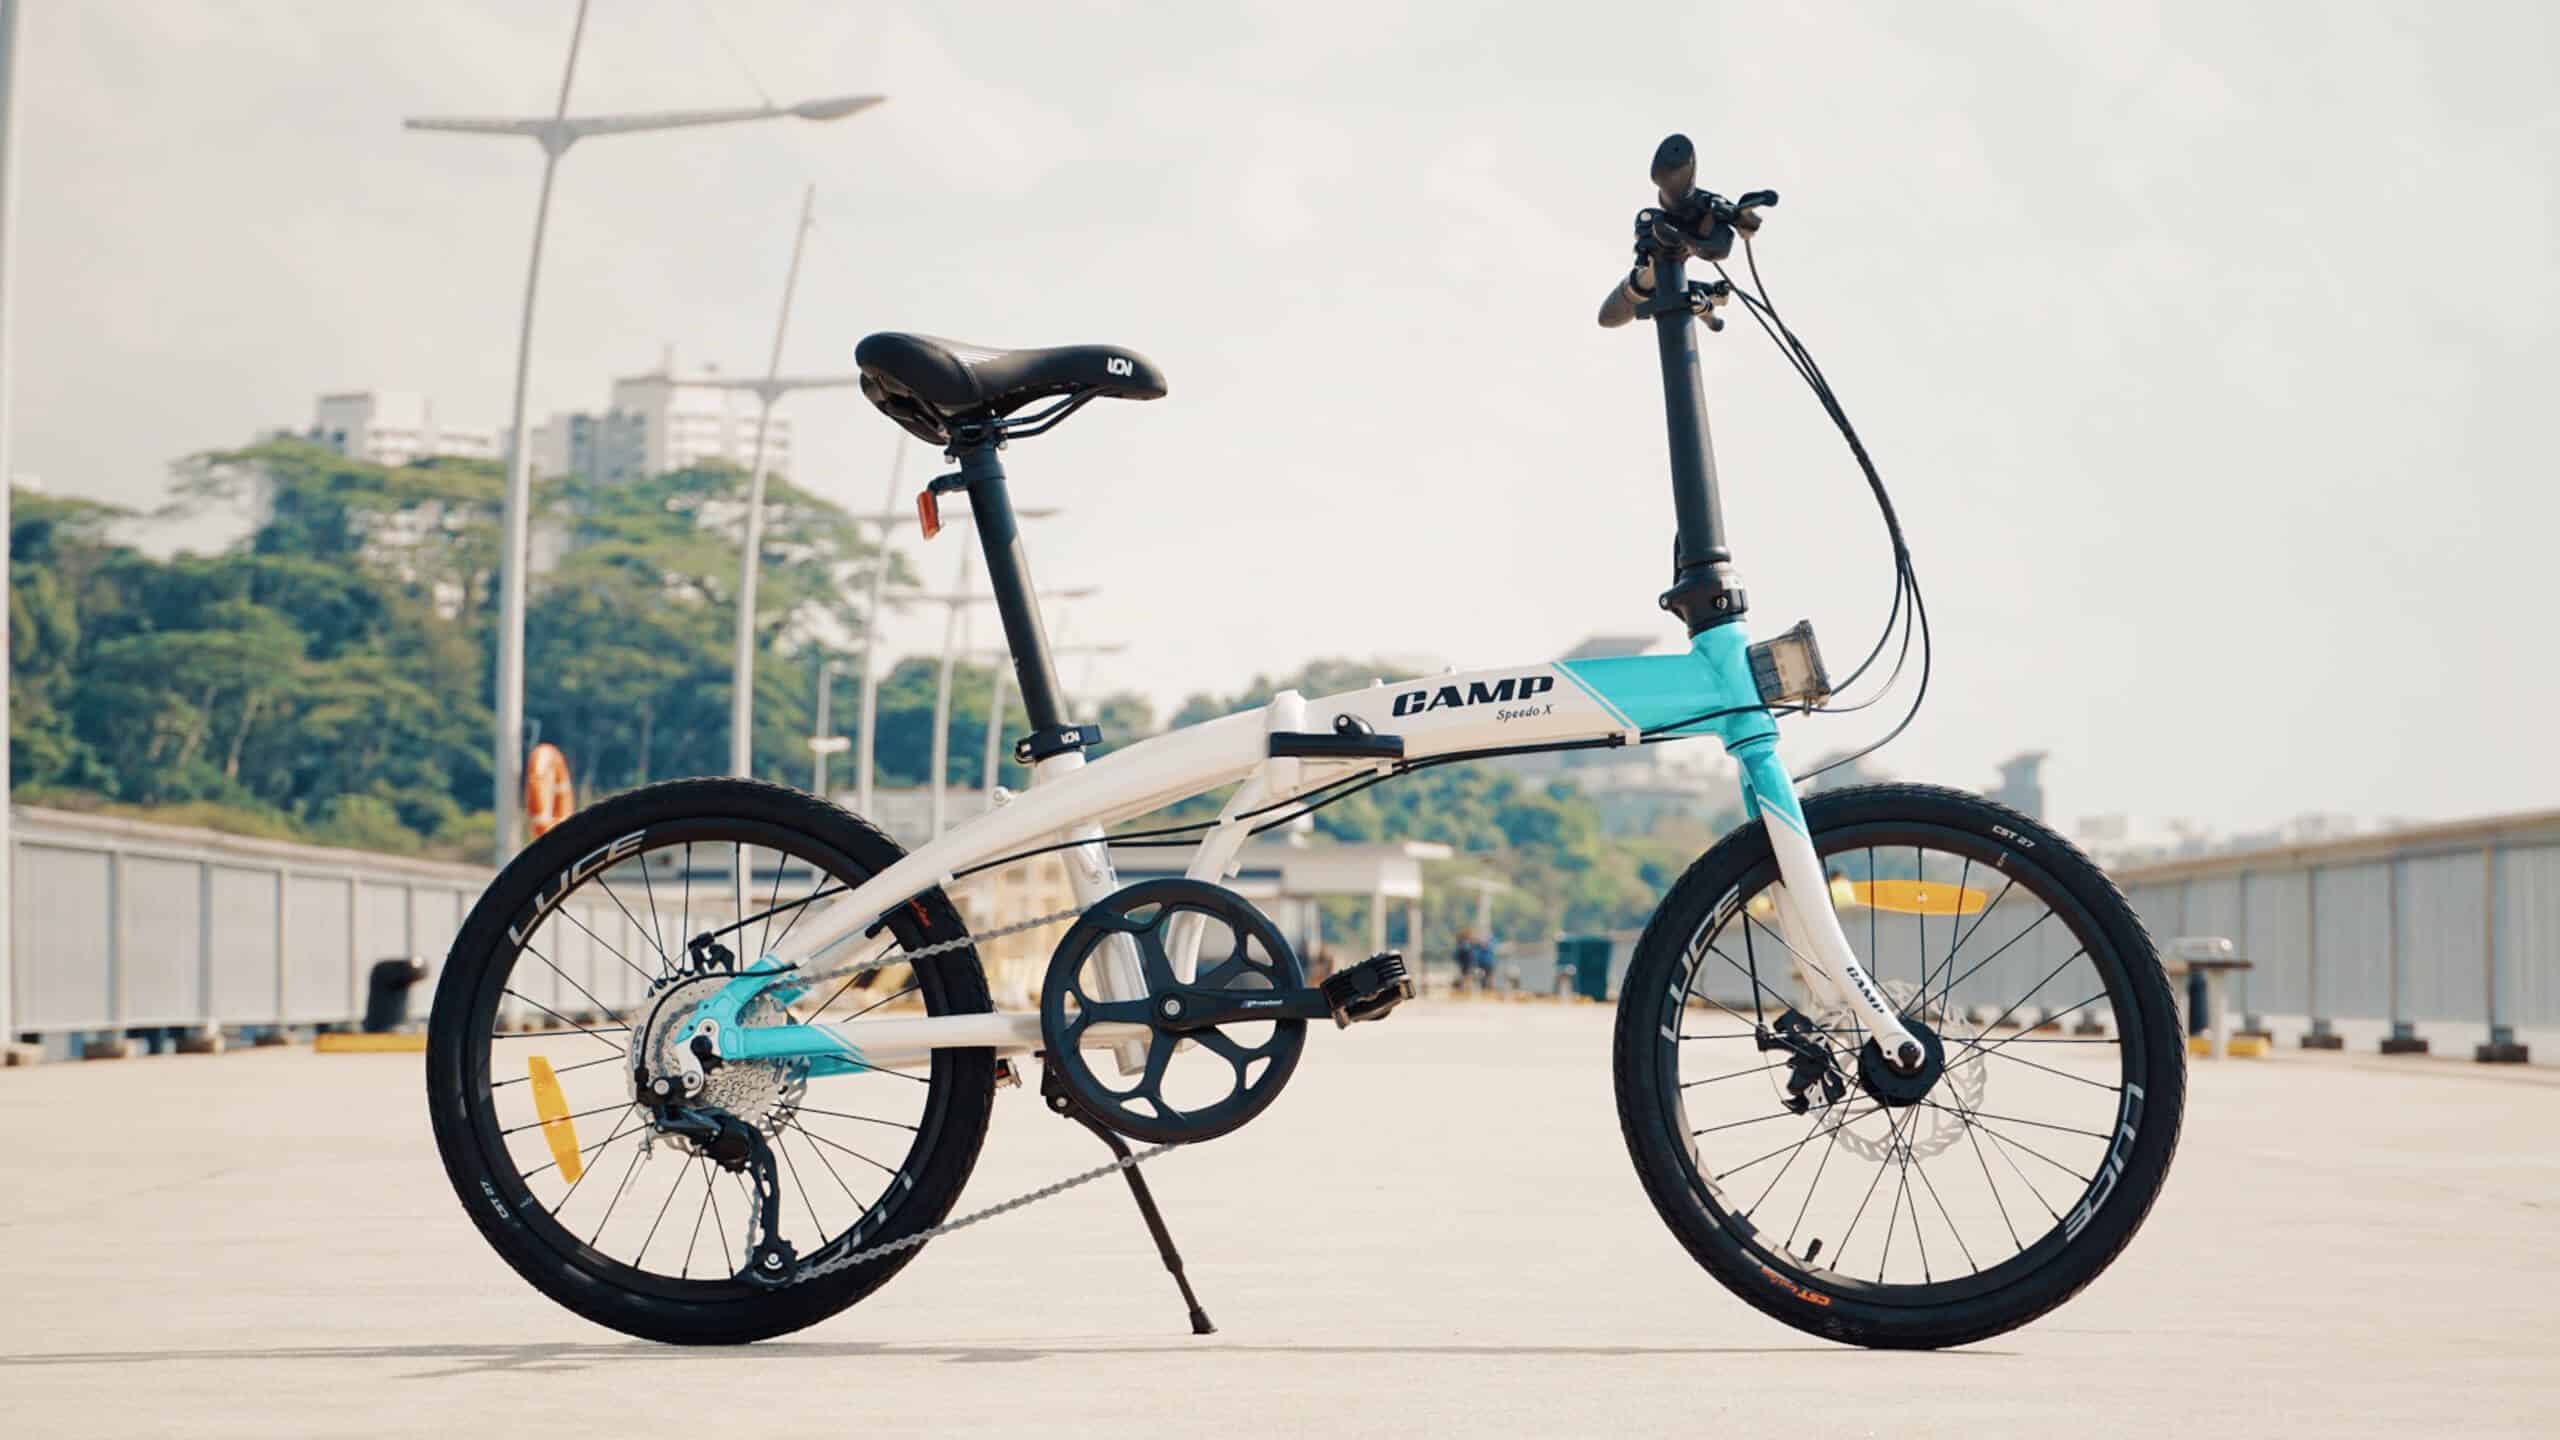 CAMP SPEEDO X (WHITE-BLUE) foldable bicycle at Woodlands Waterfront (1)